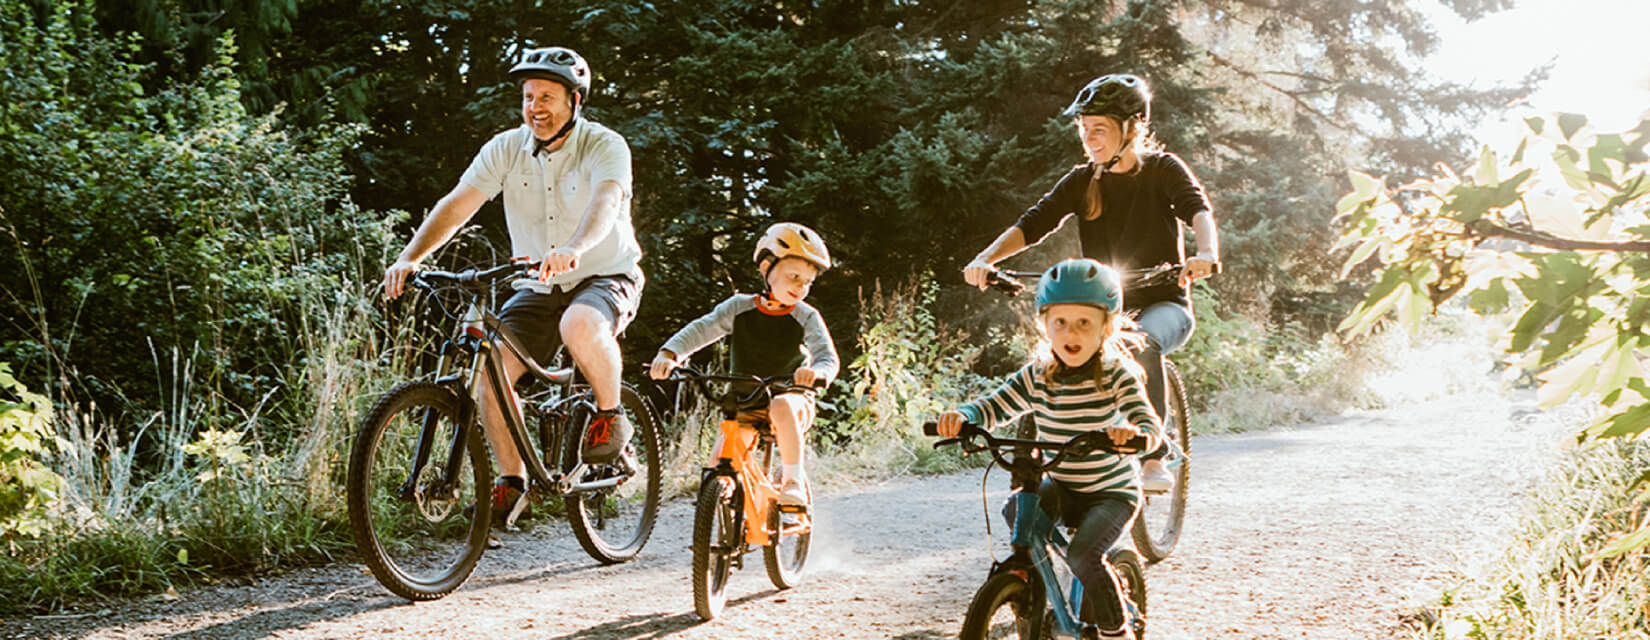 Family riding bicycles through the woods on a sunny day